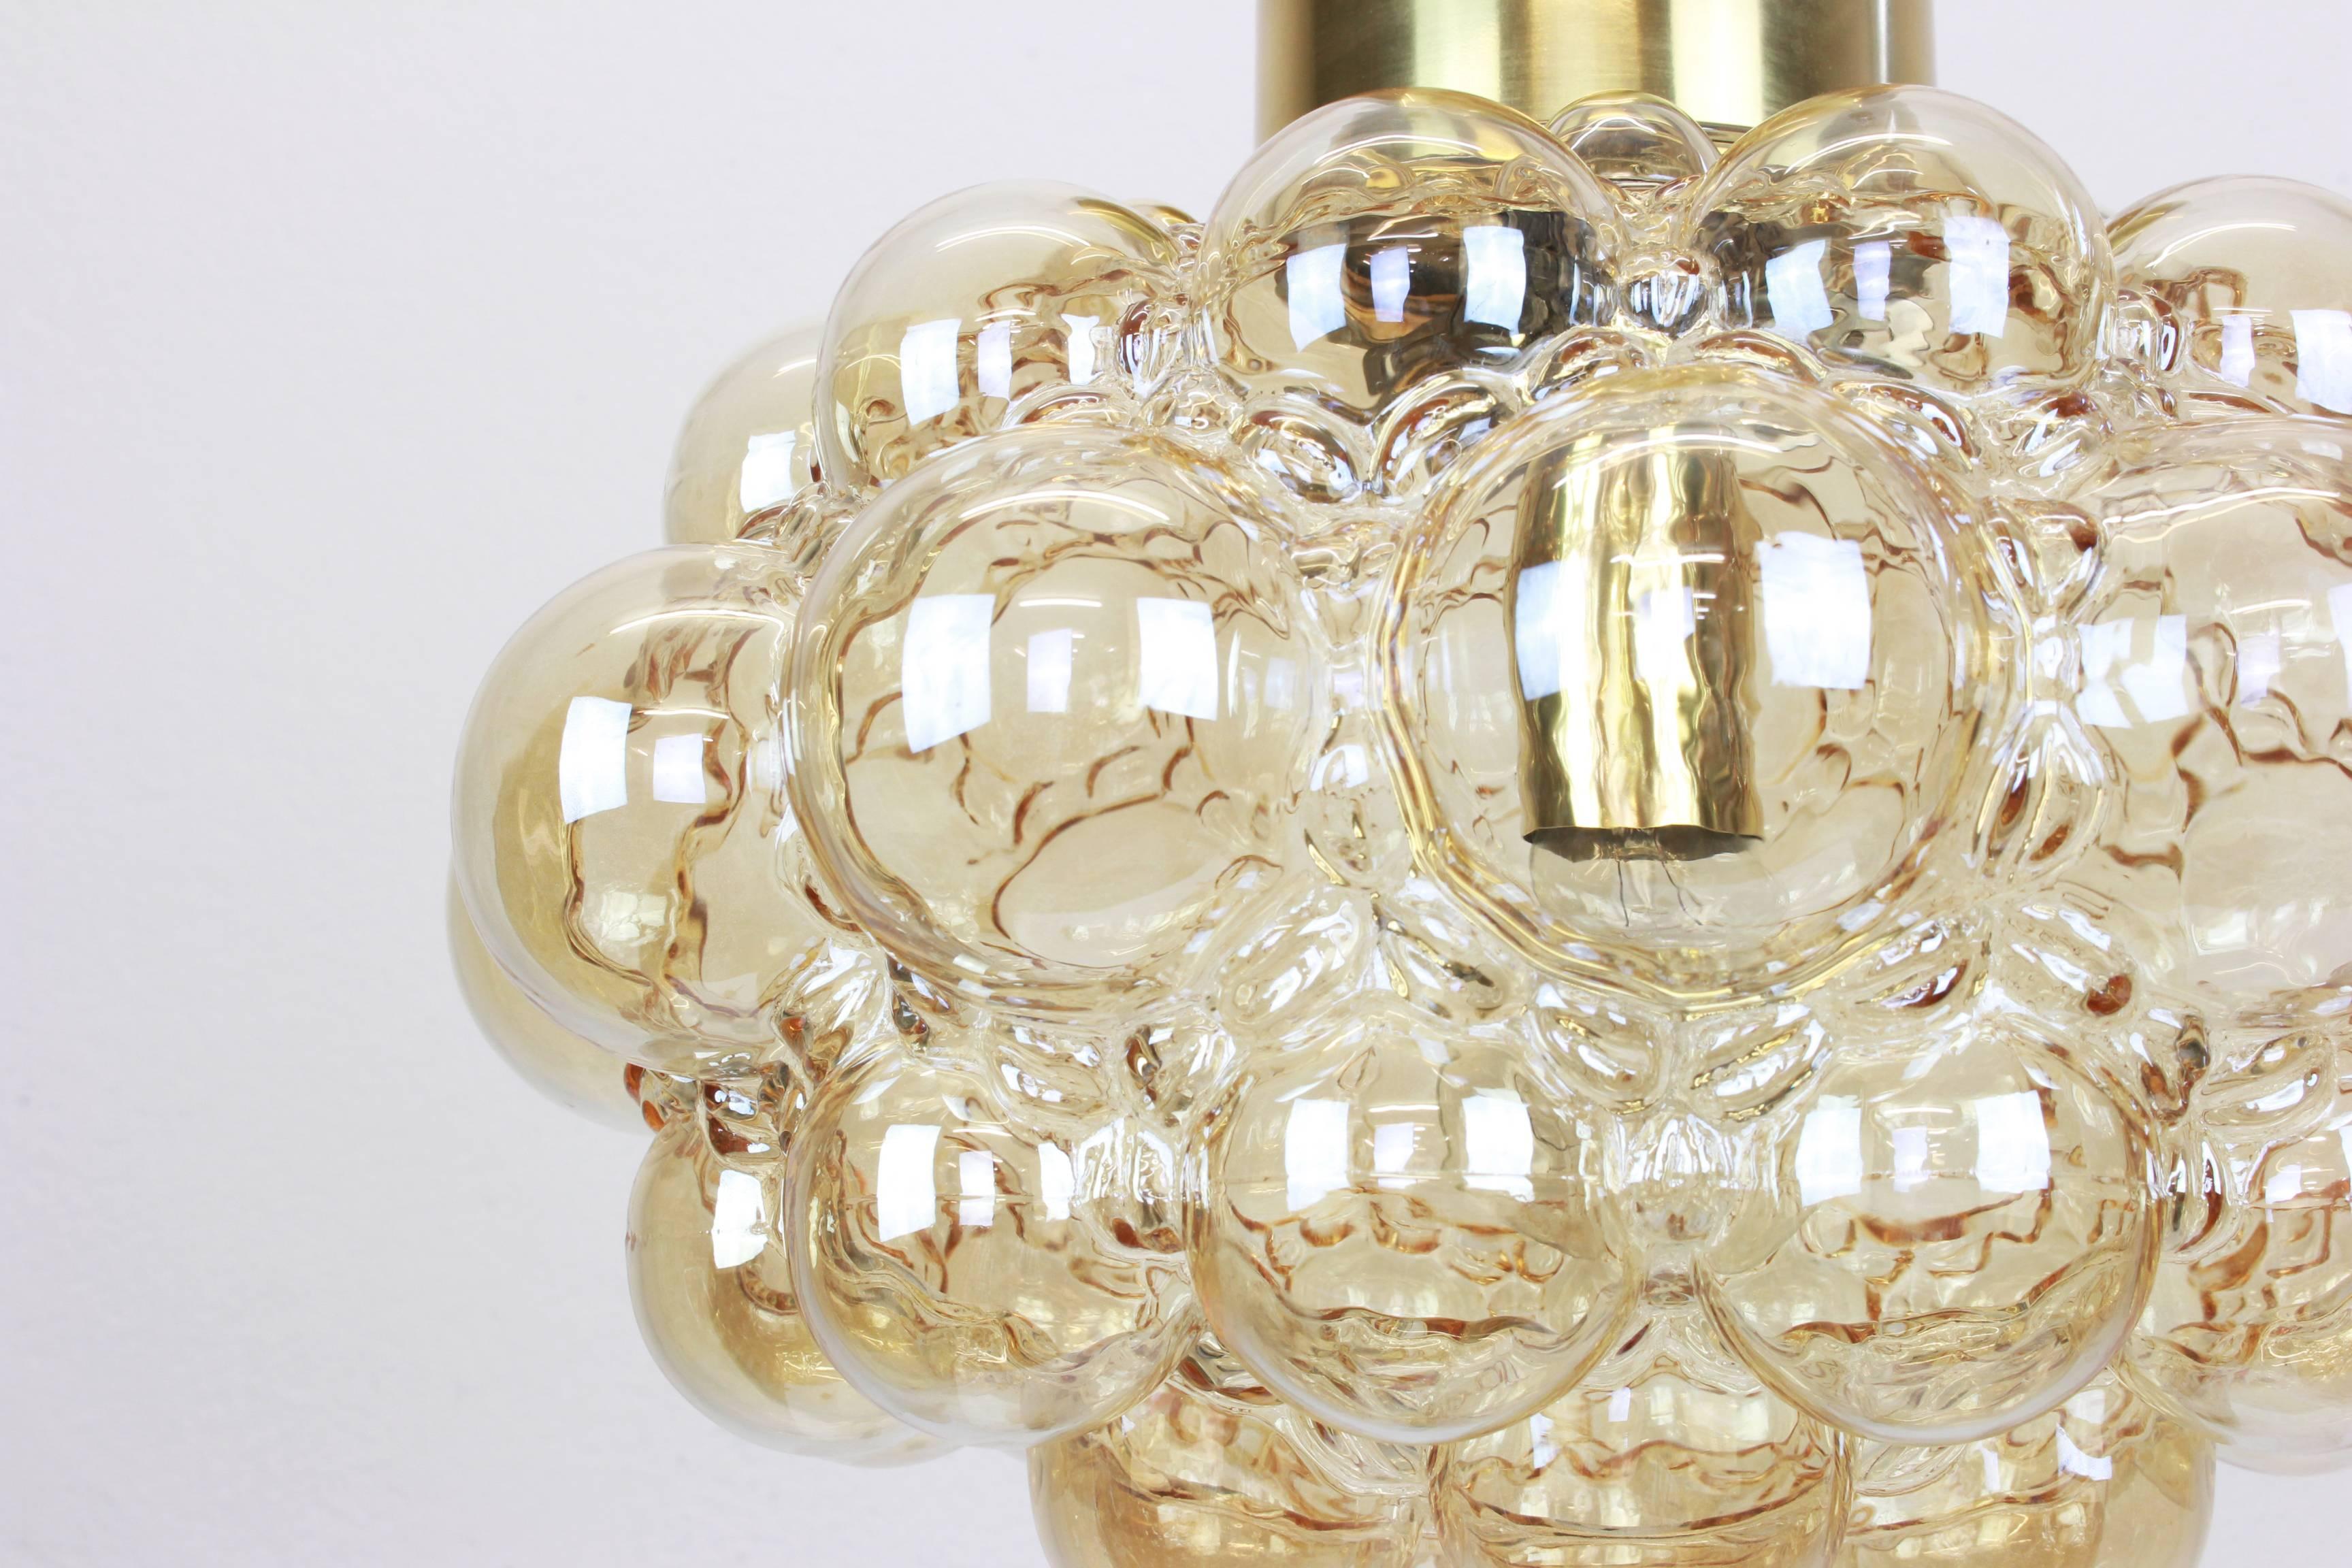 A large round smoke tone bubble glass pendant designed by Helena Tynell for Limburg, manufactured in Germany, circa 1970s.

Sockets: needs 1 x E27 standard bulb with 100W max each and compatible with the US/UK/ etc standards
Drop rod can be